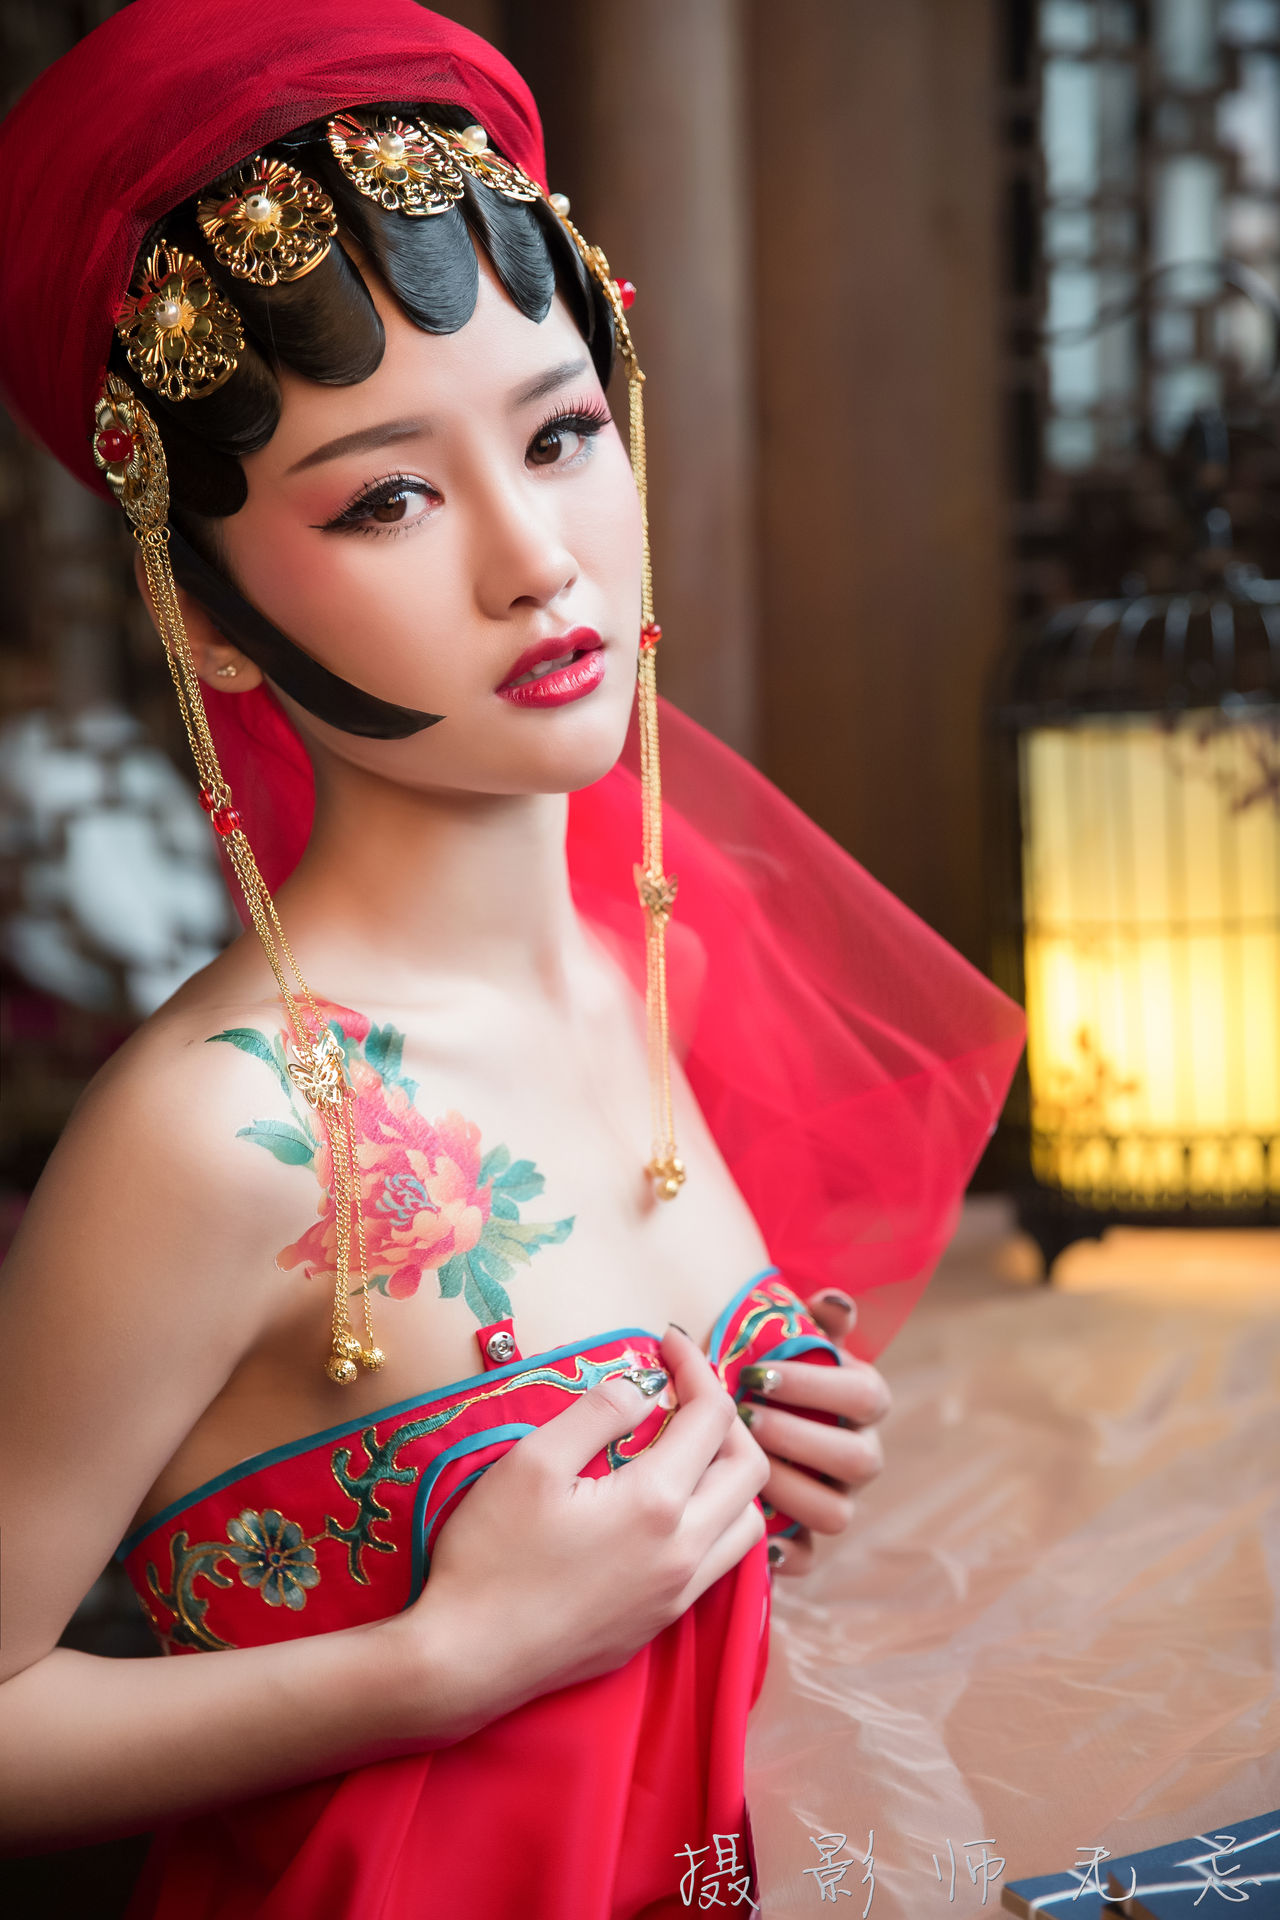 Asian Women Glamour Red Clothing Shawl Makeup Red Lipstick Jewelry Tattoo Indoors 1280x1920